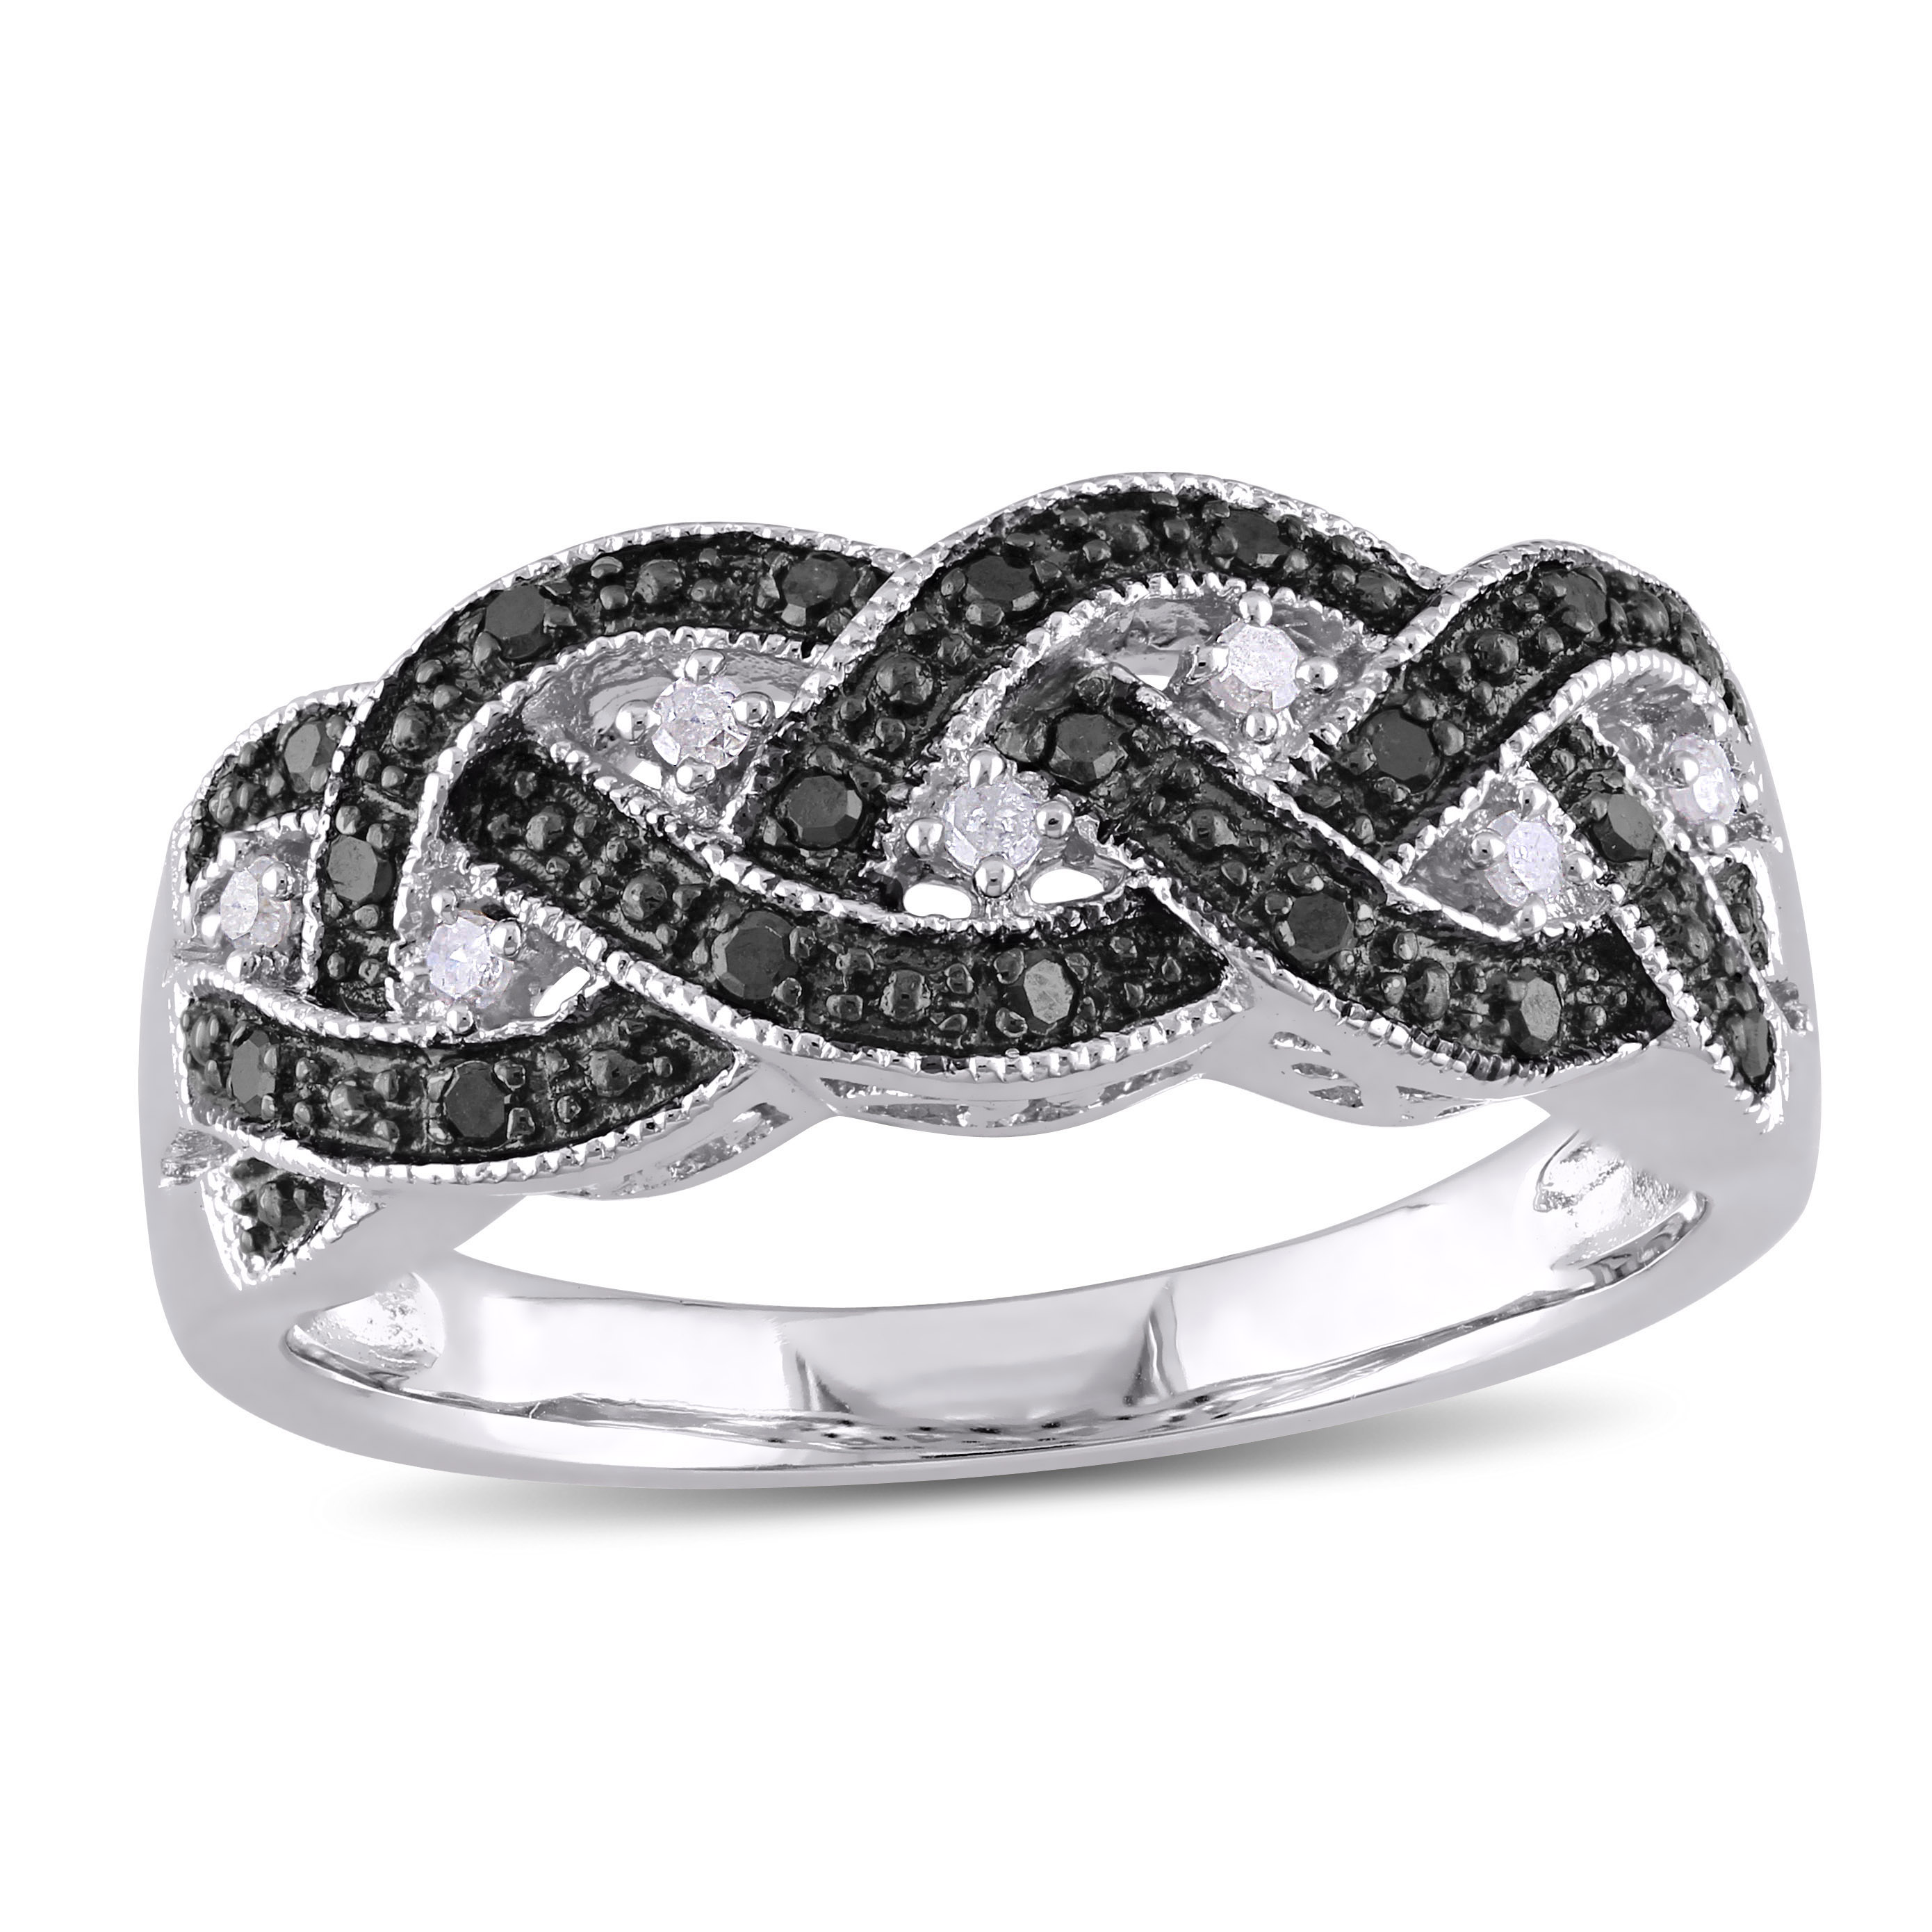 1/6 CT TW Black and White Diamond Braided Anniversary Band in Sterling Silver with Black Rhodium